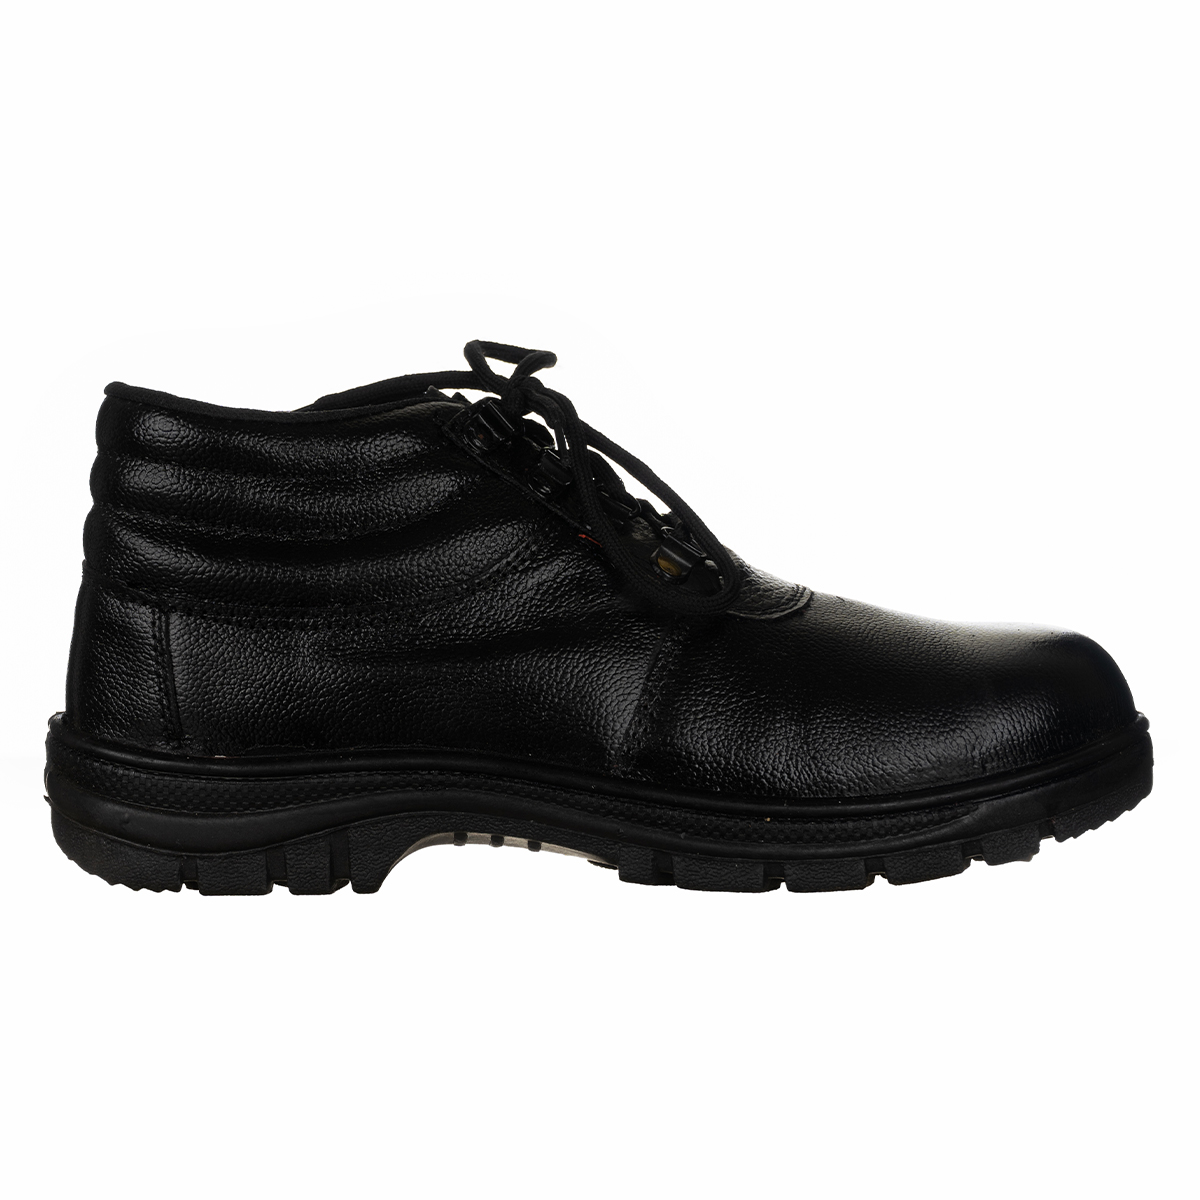 PVC Sole Safety Shoe Manufacturers, Suppliers in Pune